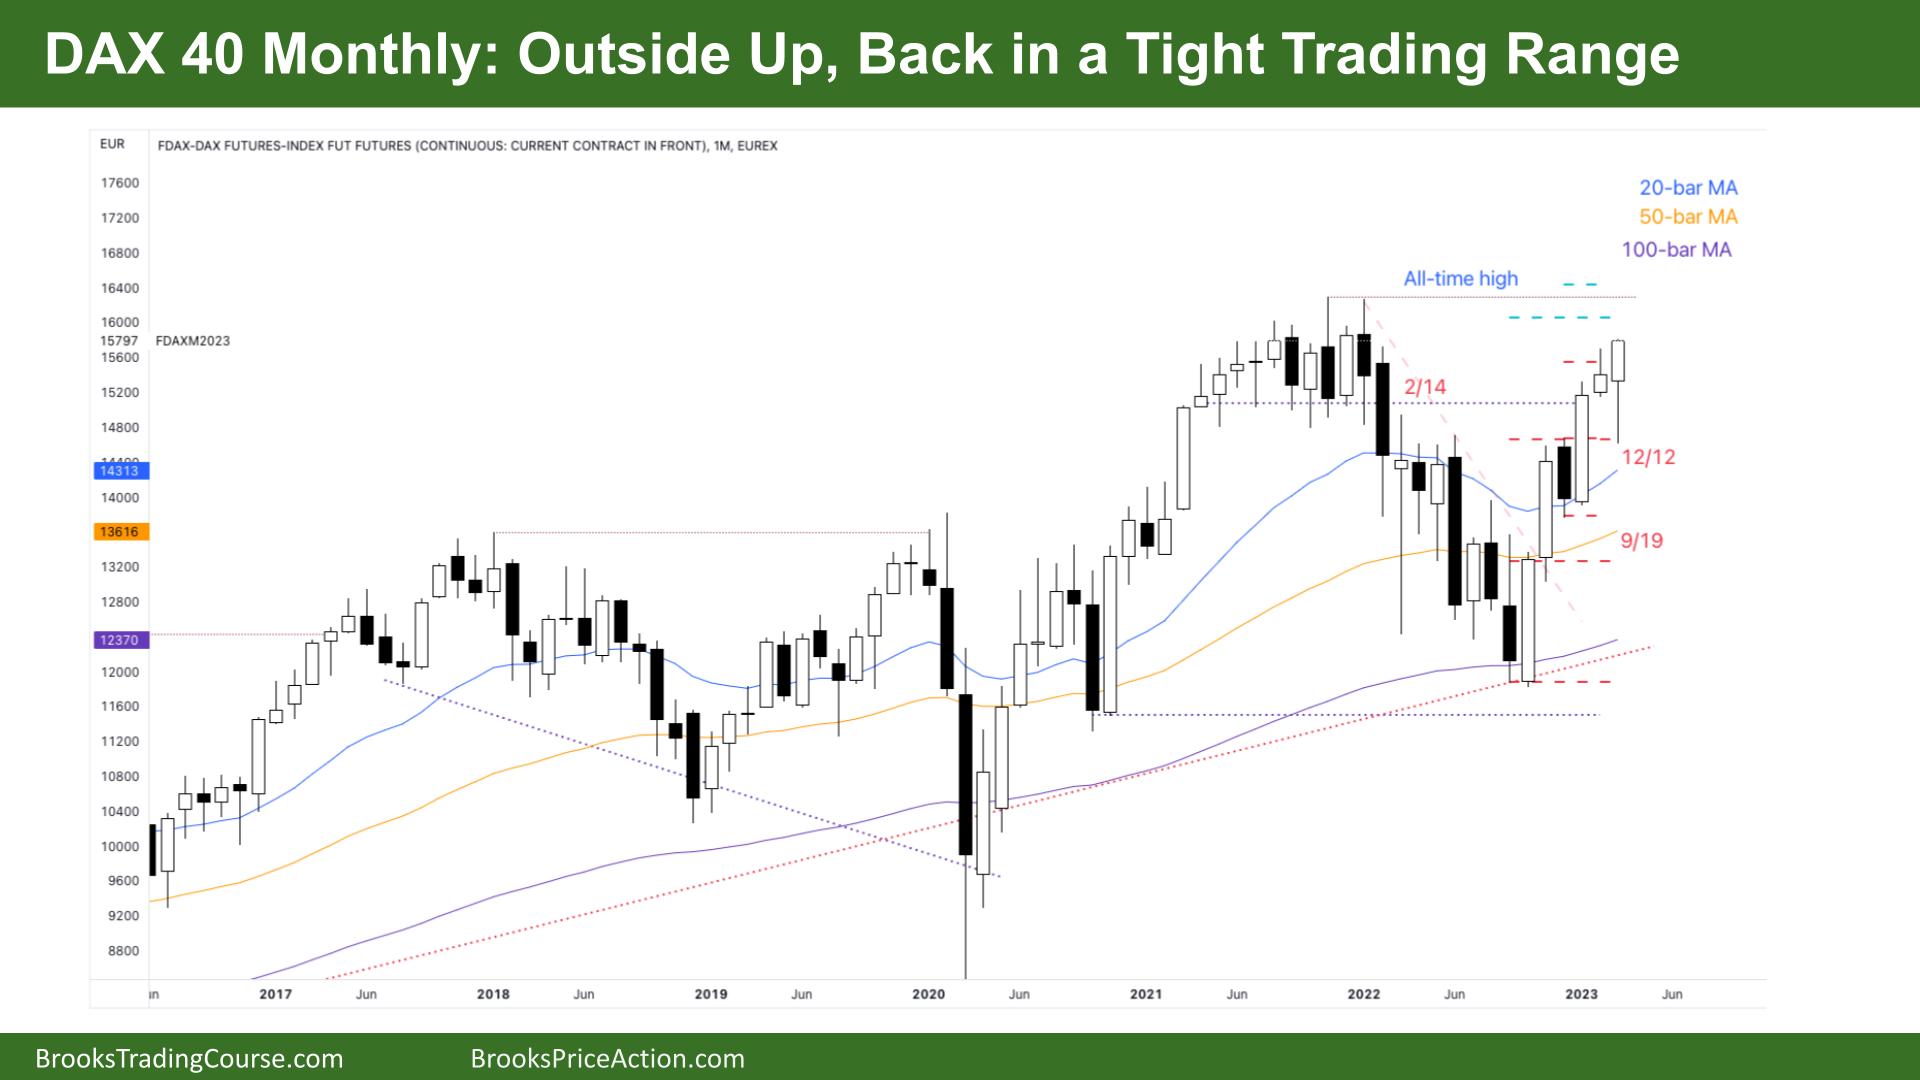 DAX 40 Outside Up, Back in a Tight Trading Range